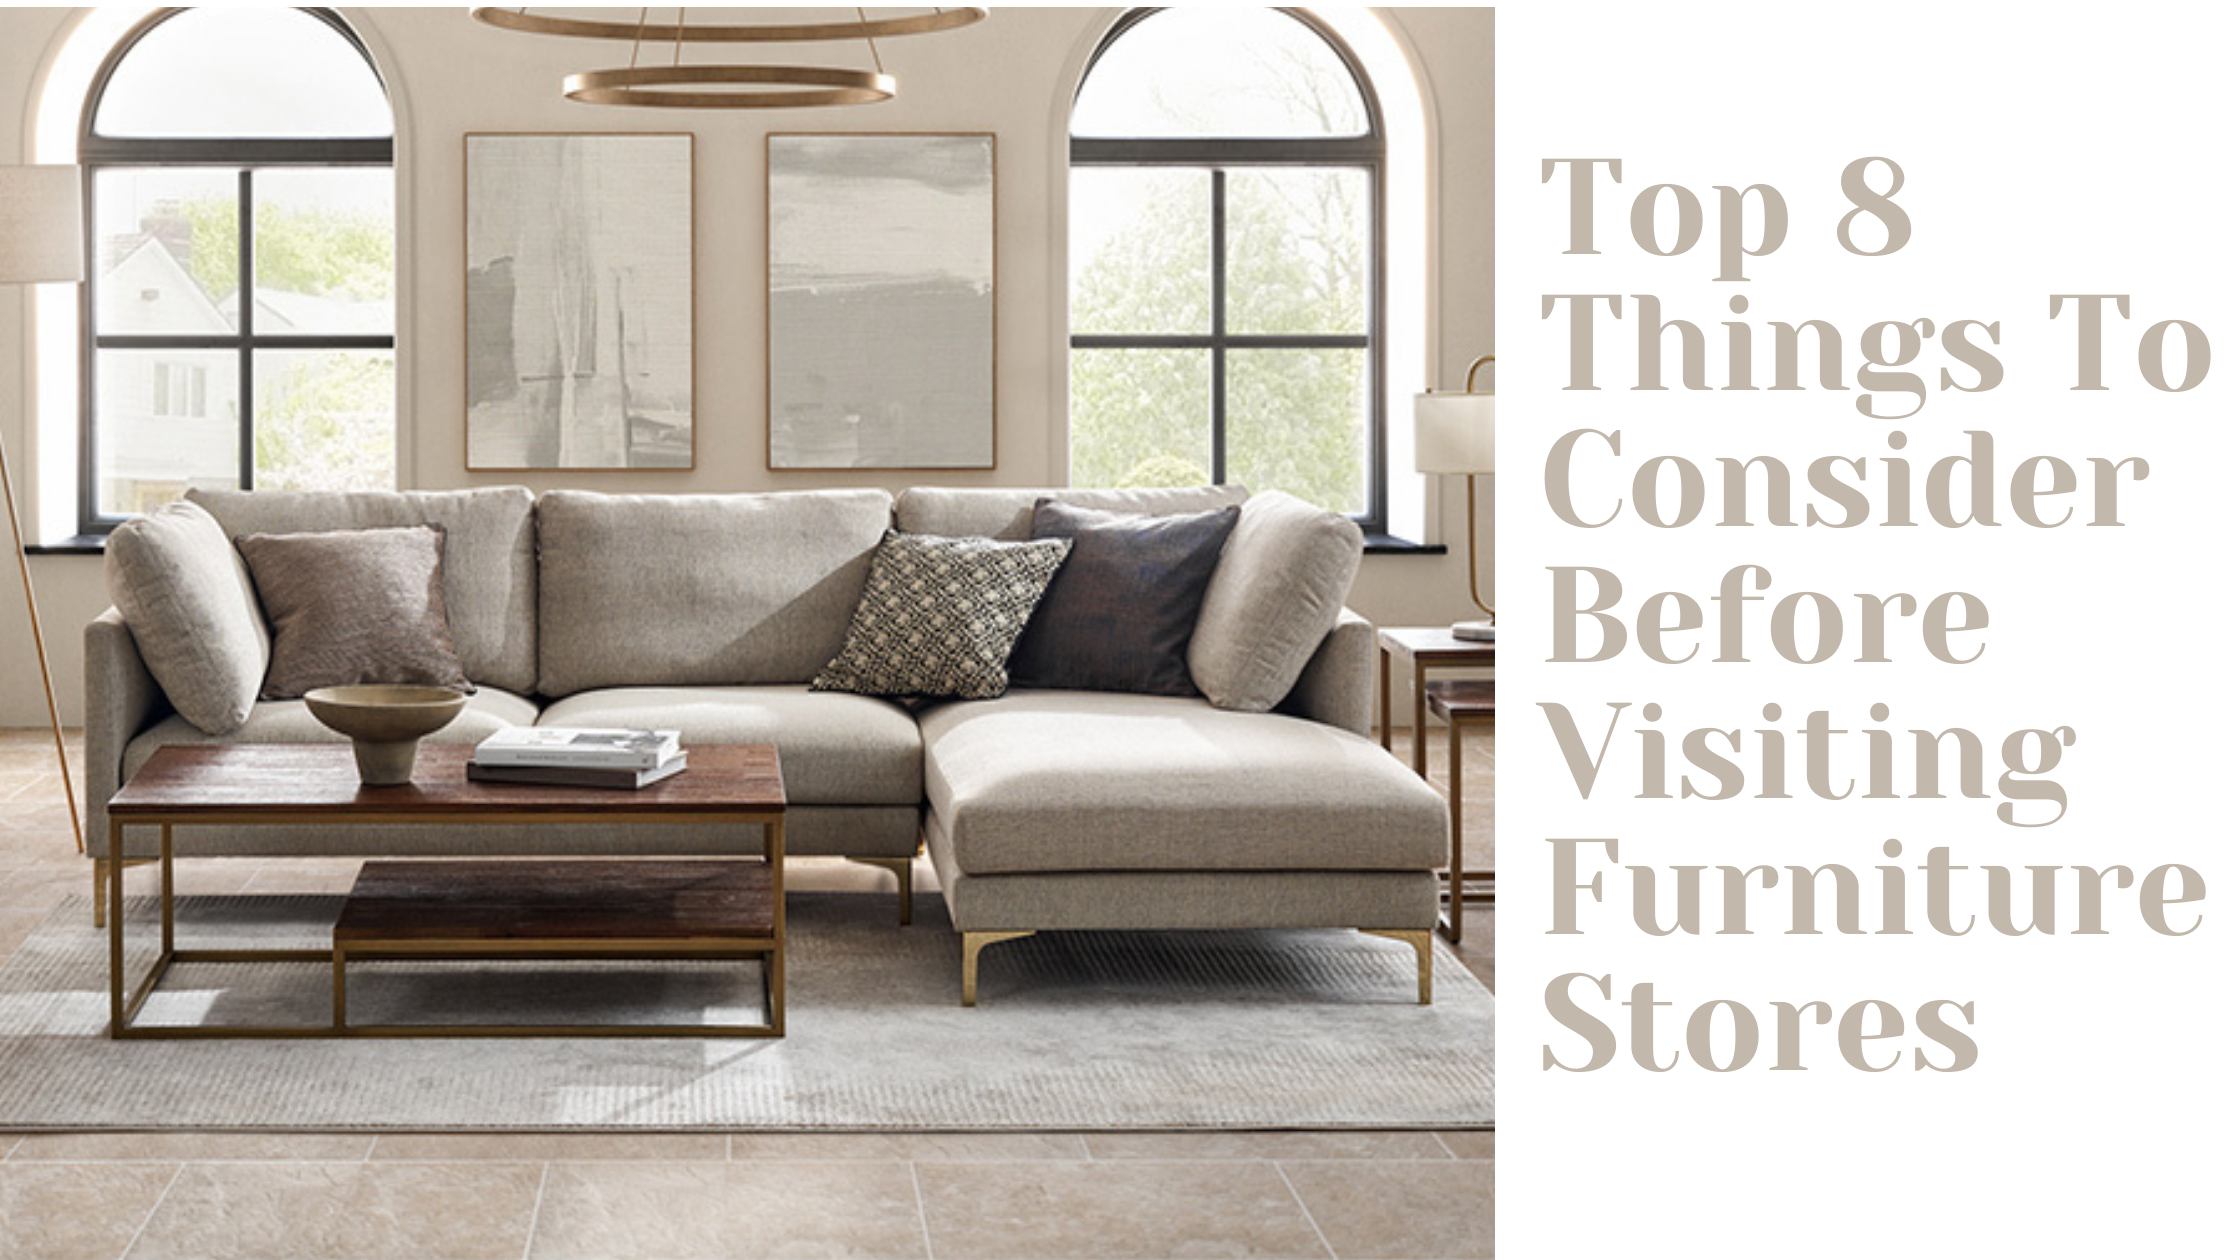 Top 8 Things to Consider Before Visiting Furniture Stores